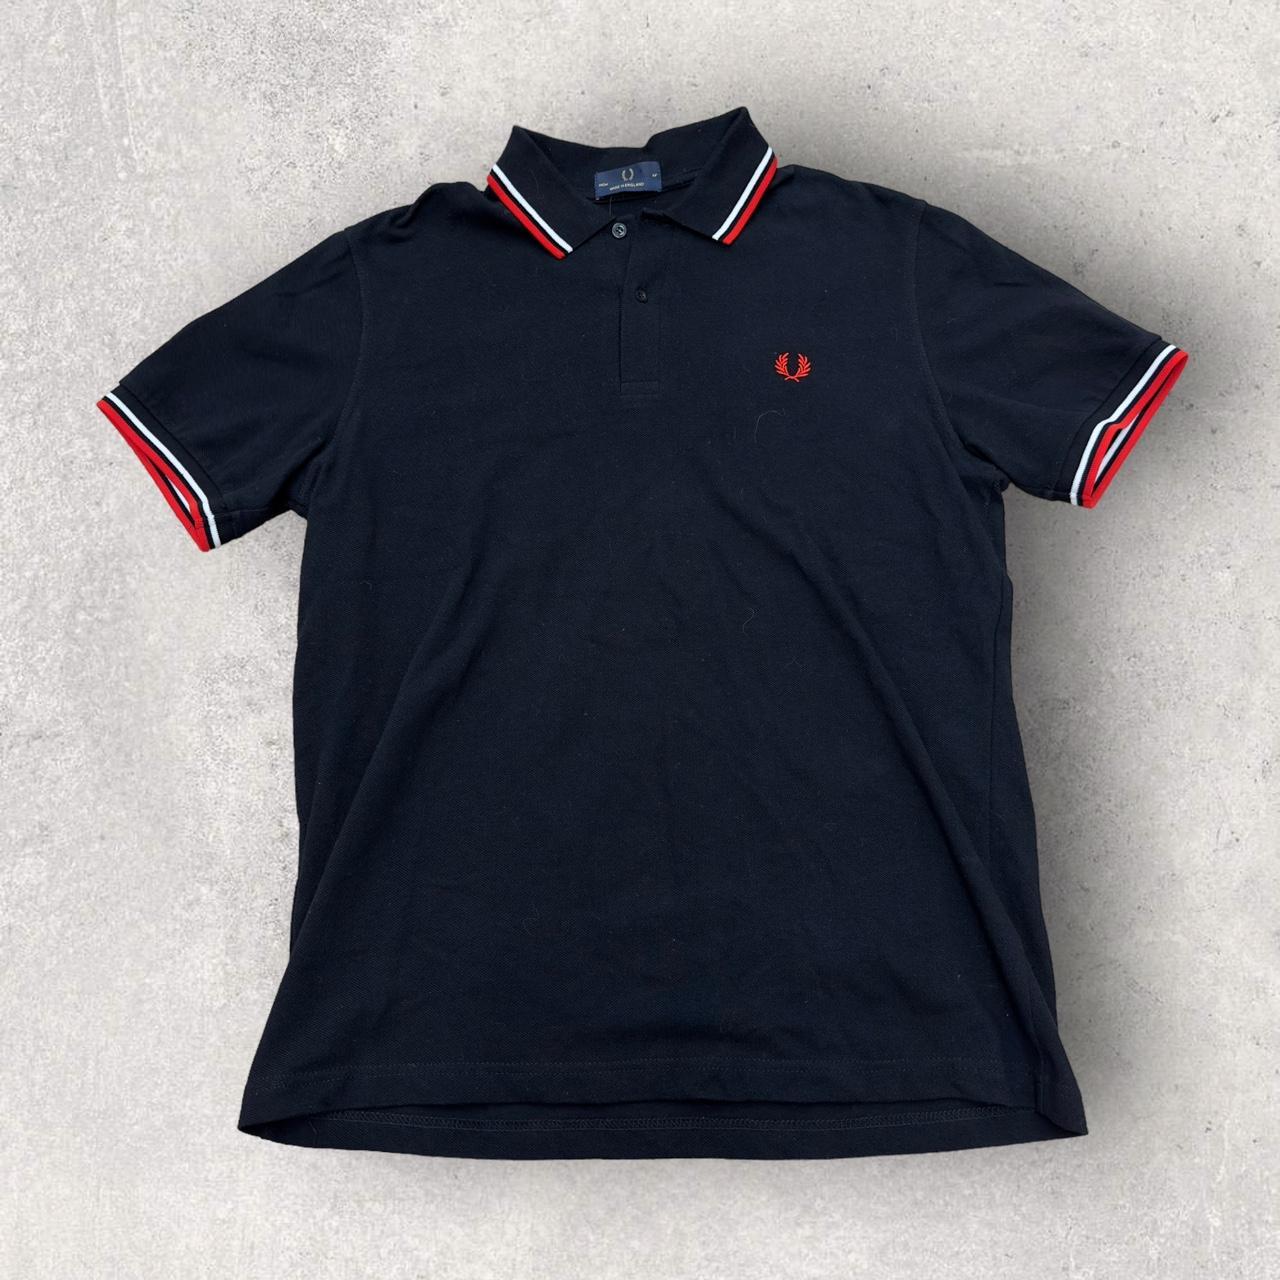 Fred Perry Men's Black Polo-shirts